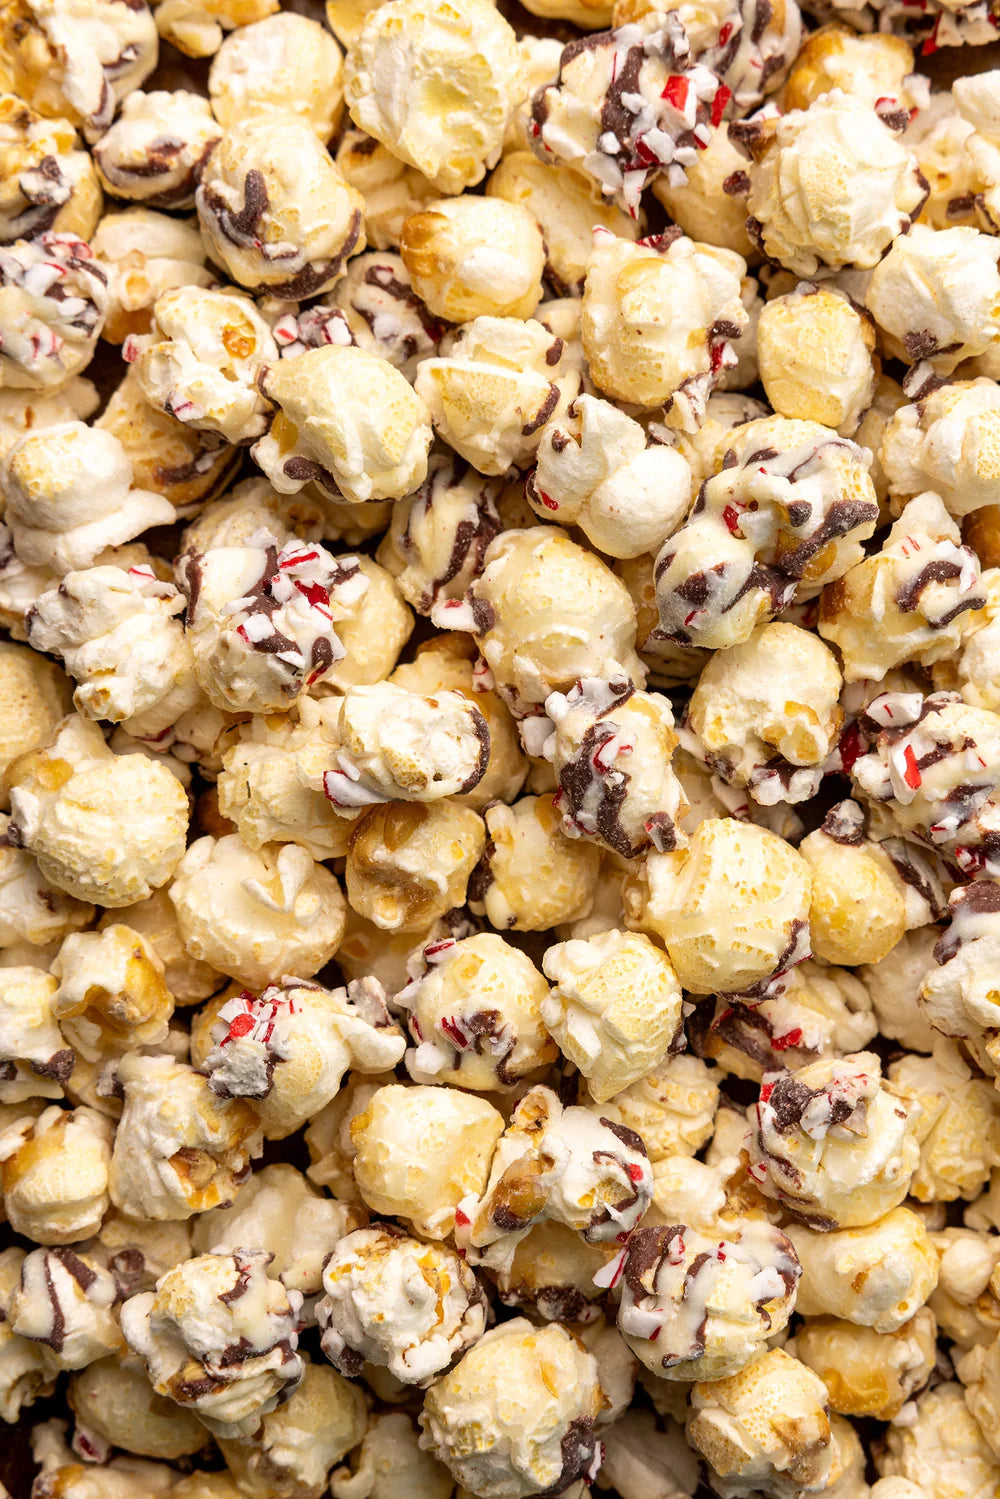 Chocolate Peppermint Hand-Crafted Popcorn